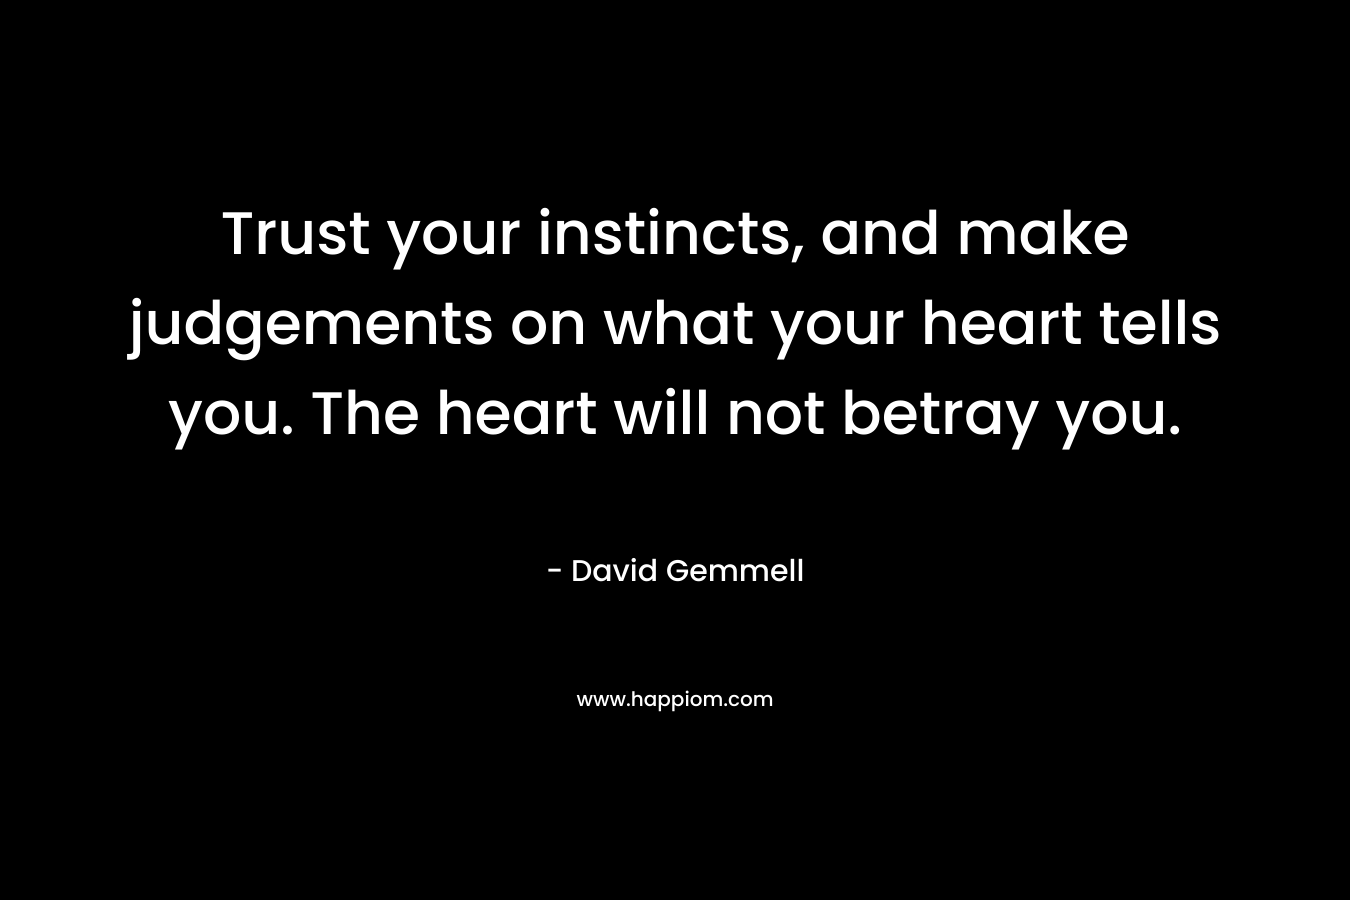 Trust your instincts, and make judgements on what your heart tells you. The heart will not betray you. – David Gemmell